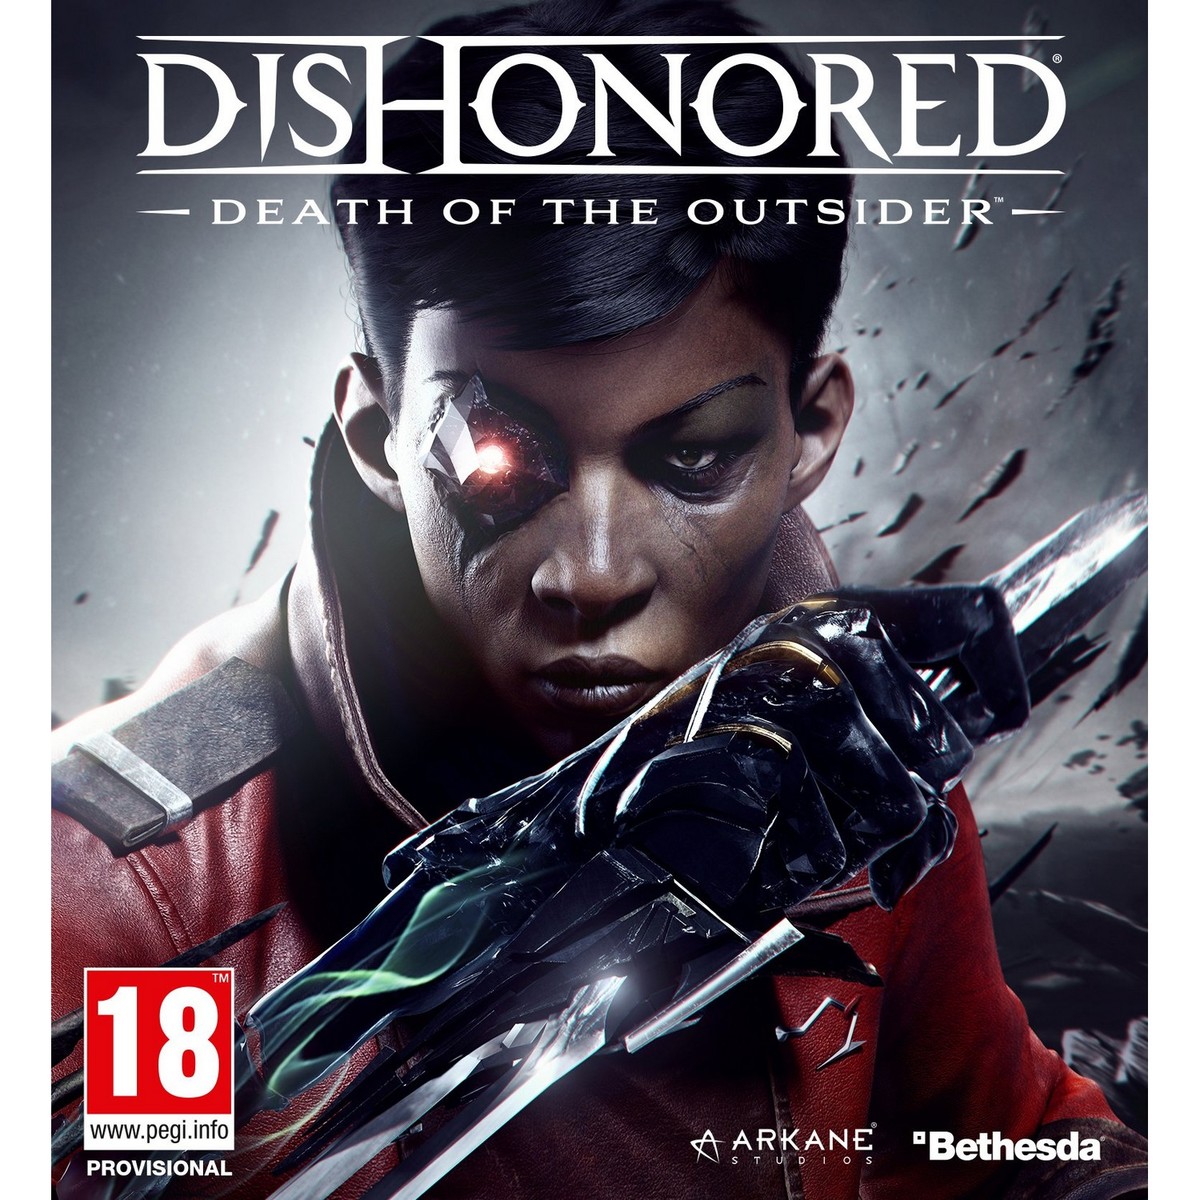 PS4 Dishonored - Death of an Outsider